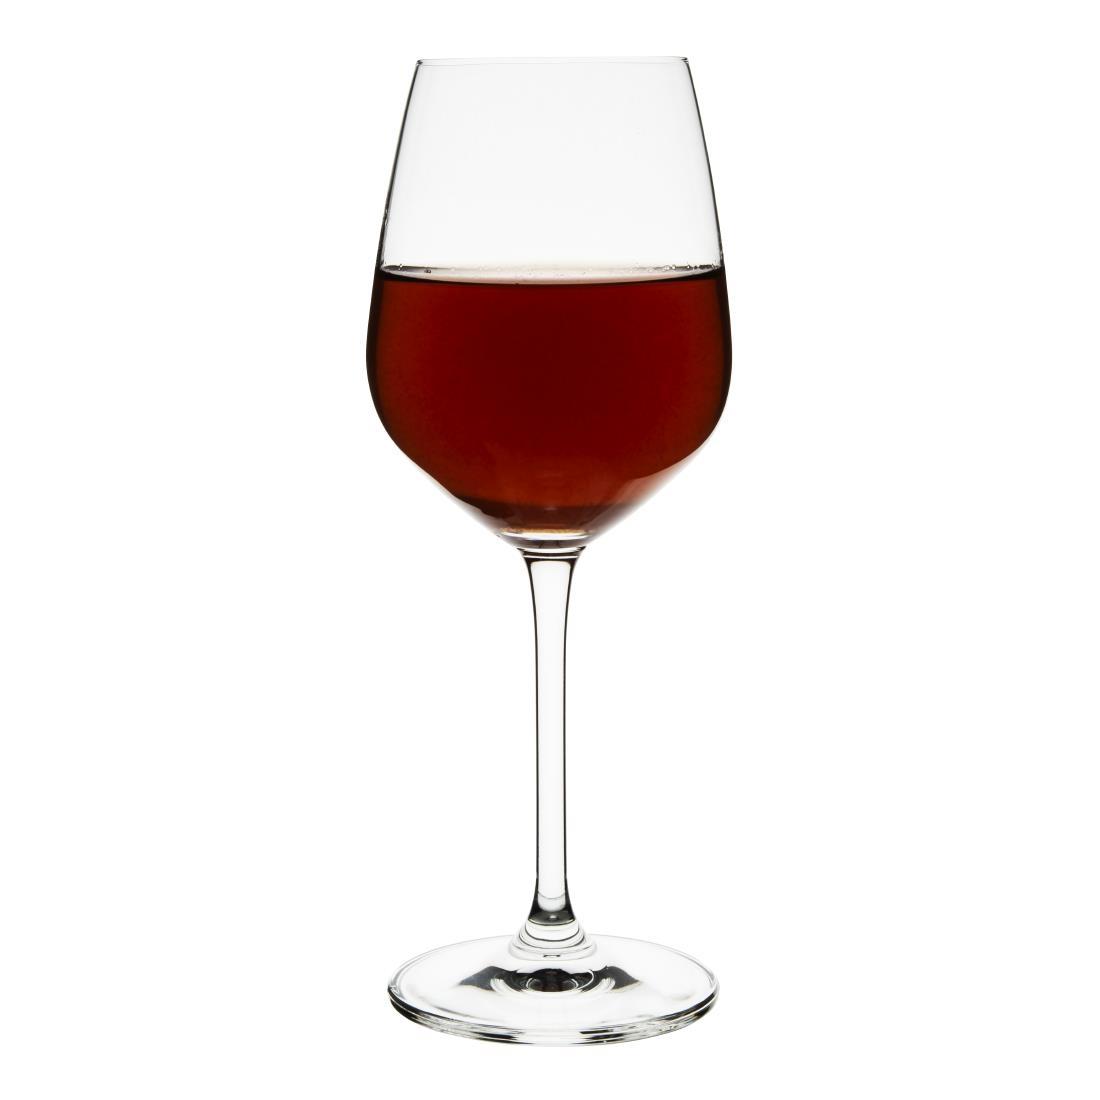 Olympia Chime Crystal Wine Glasses 365ml (Pack of 6) - GF733  - 4